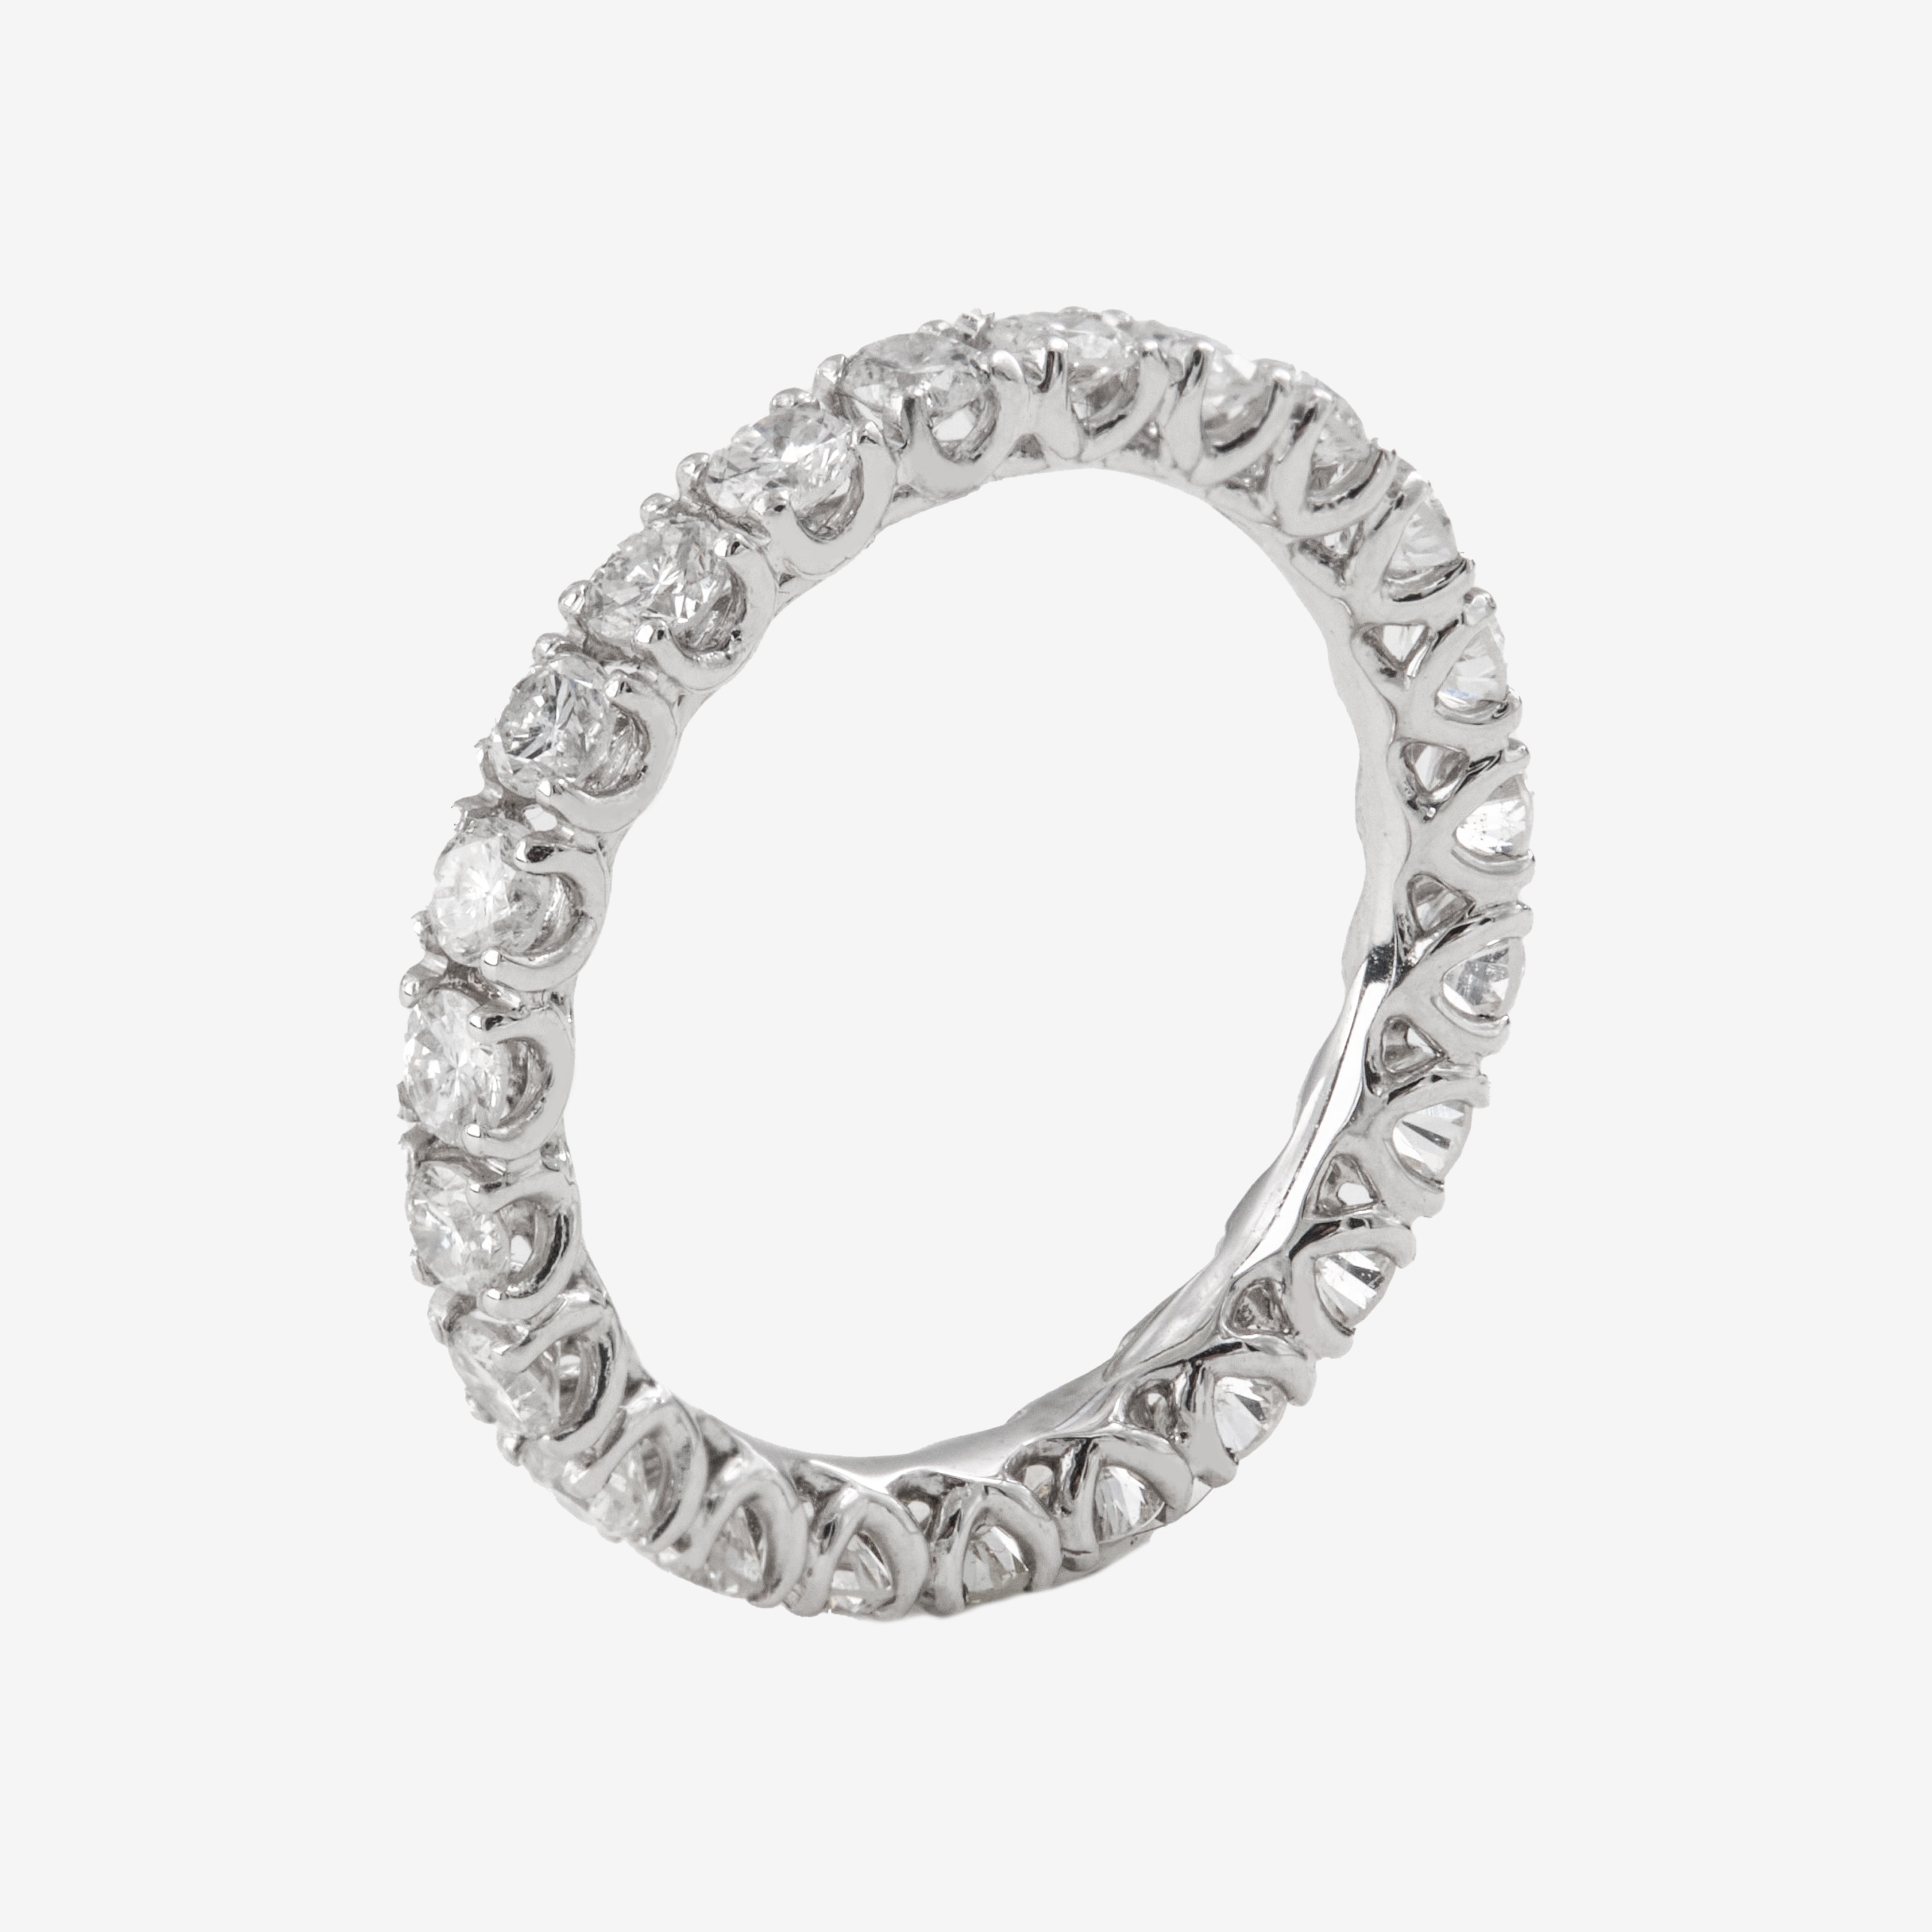 White Gold Eternity Ring with White Diamonds 1ct